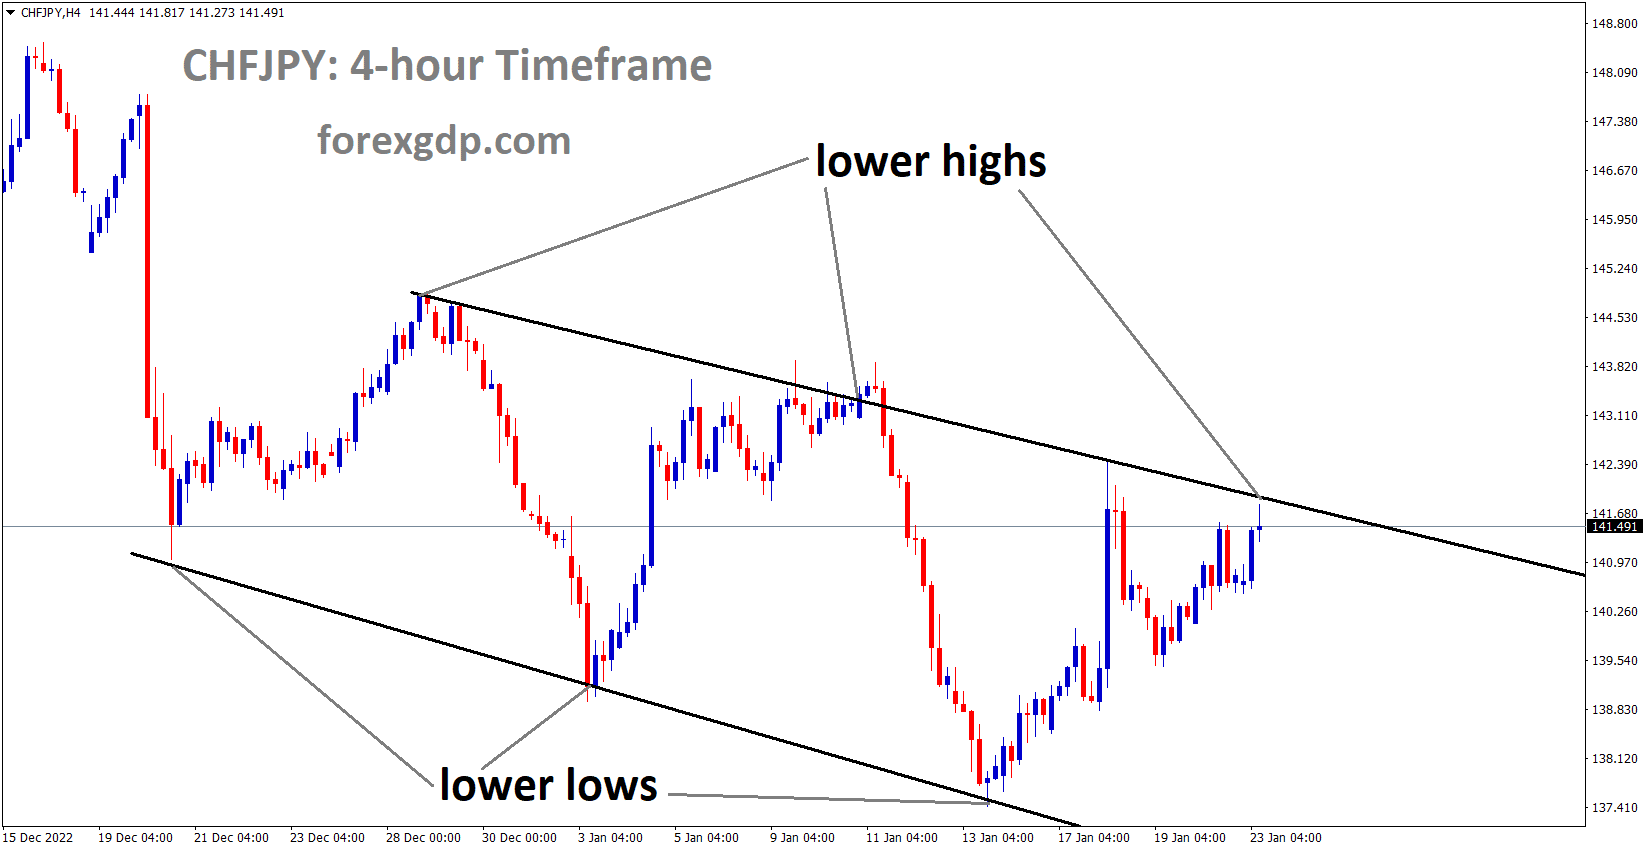 CHFJPY is moving in the Descending channel and the market has reached the lower high area of the channel 1